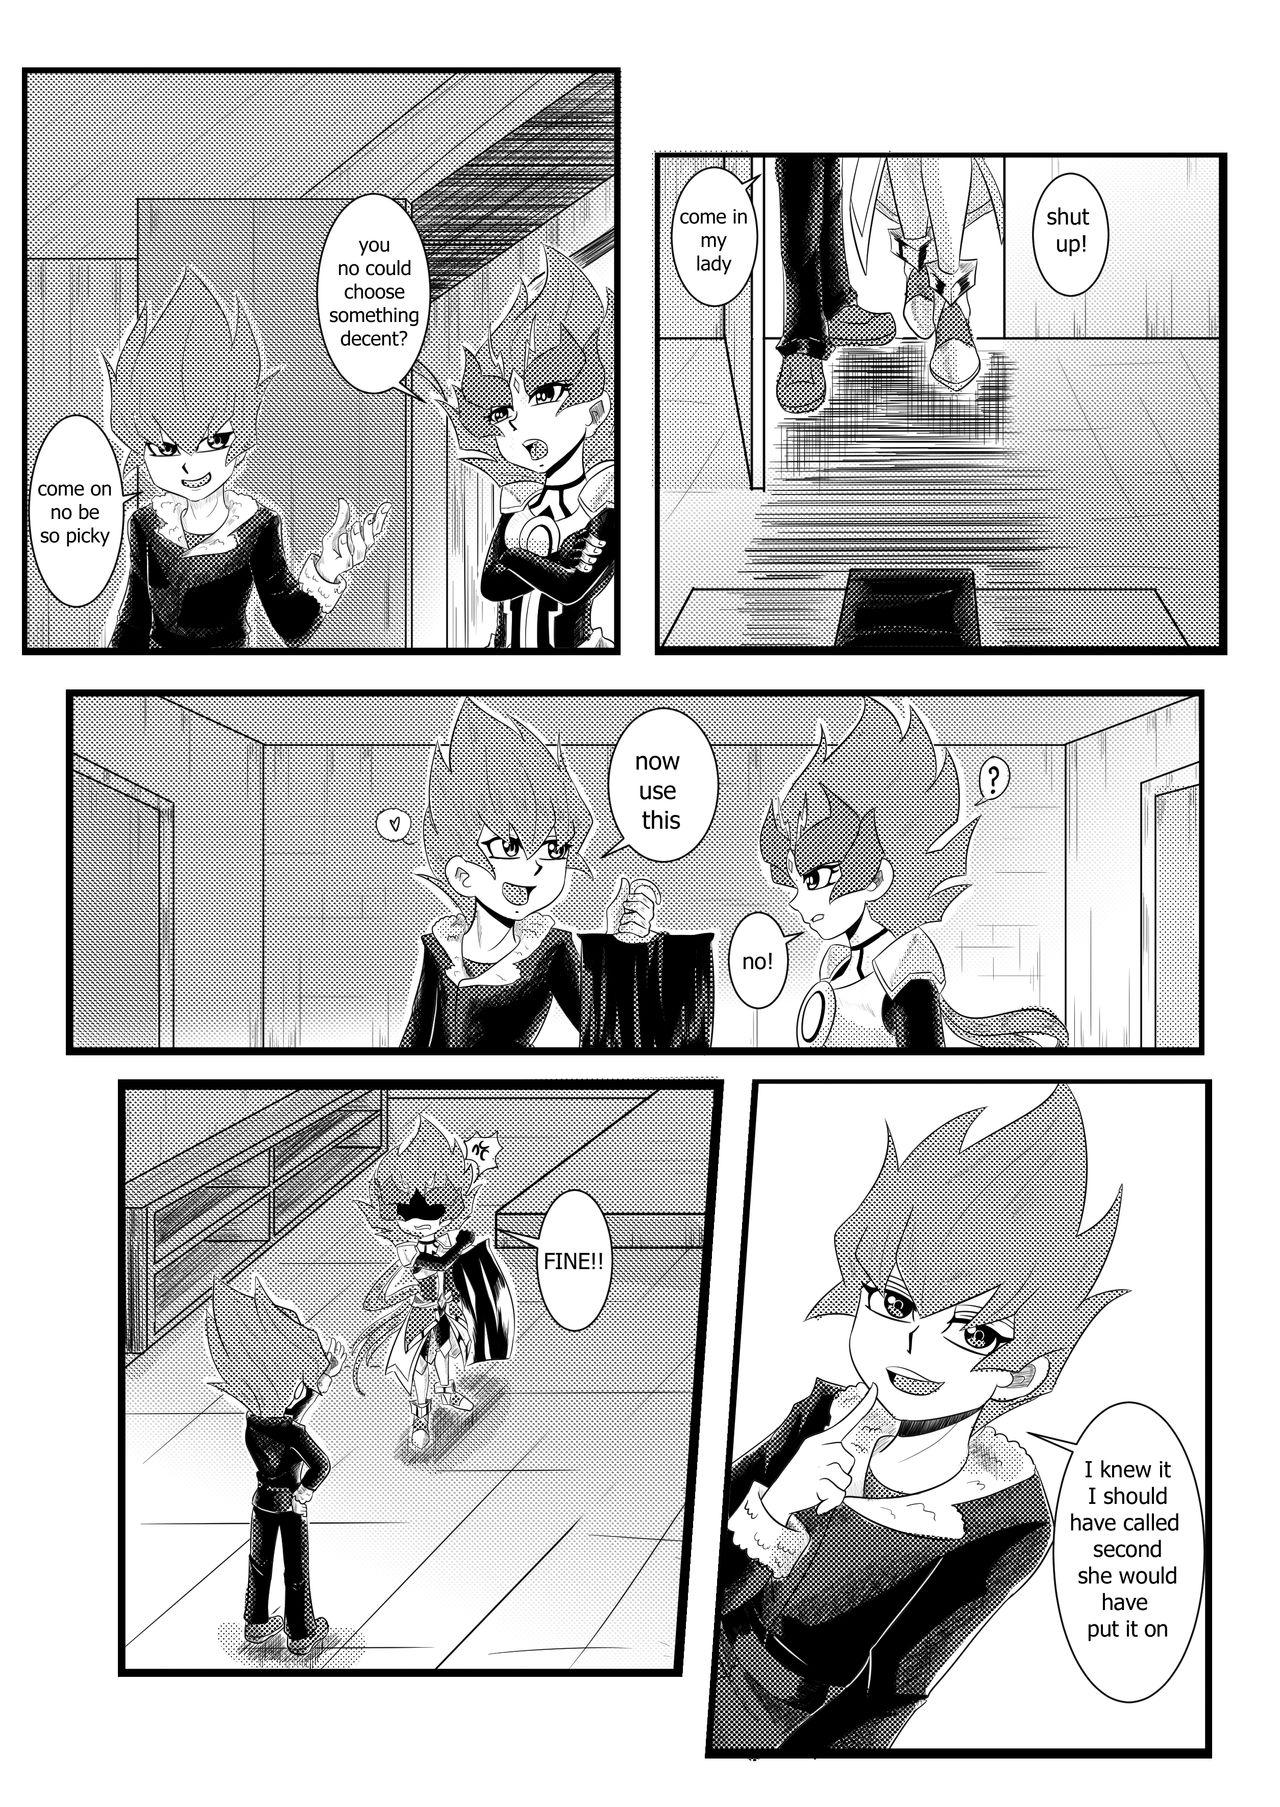 Para For Her - Yu-gi-oh zexal Cuckold - Page 10